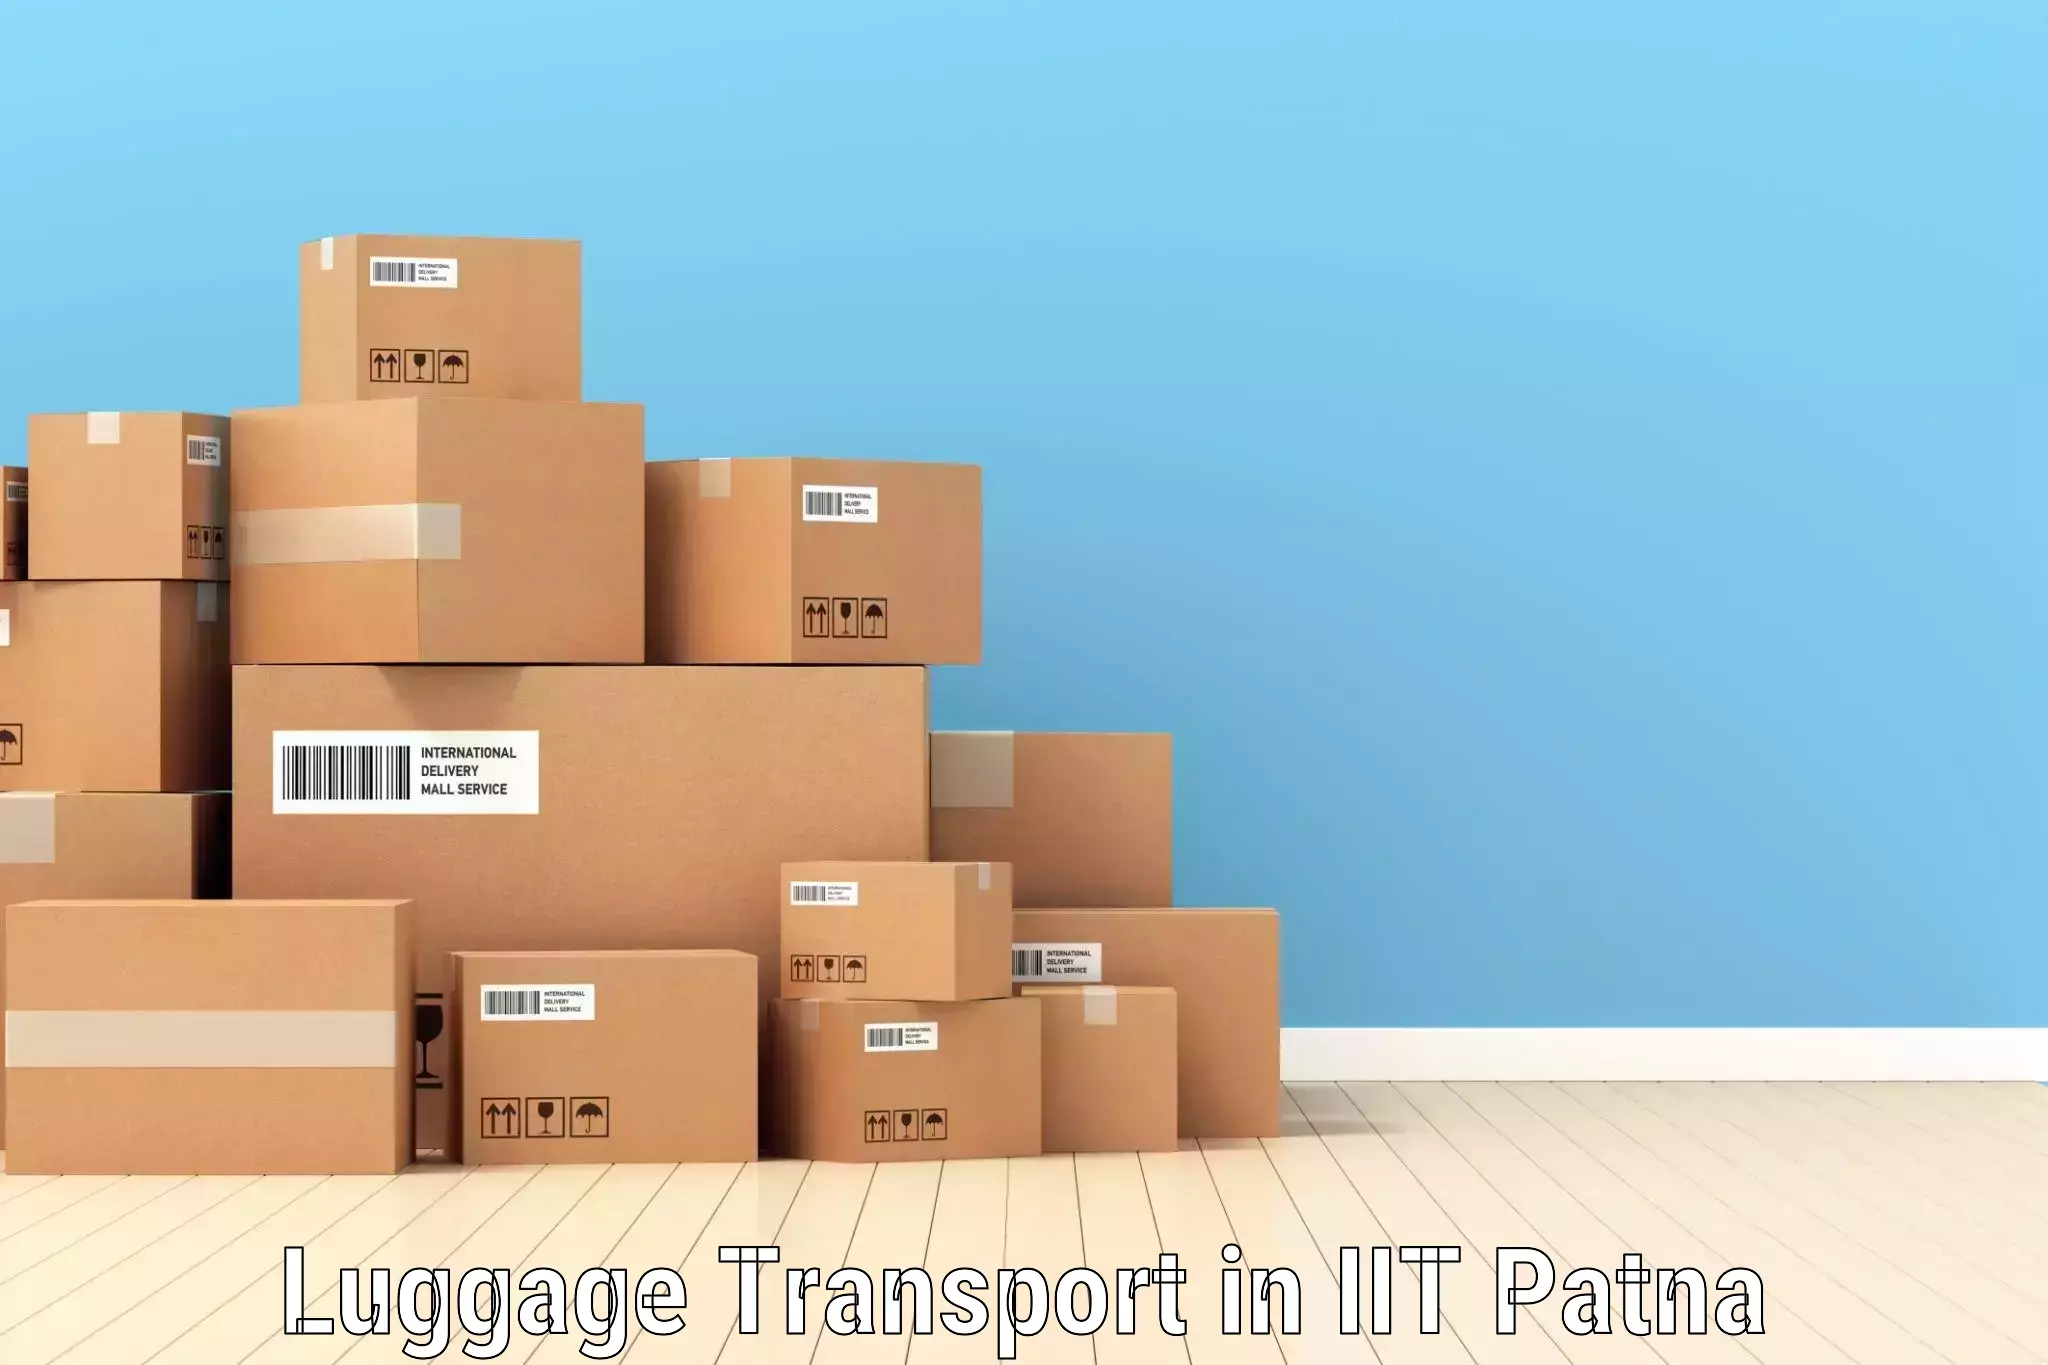 Luggage transport solutions in IIT Patna